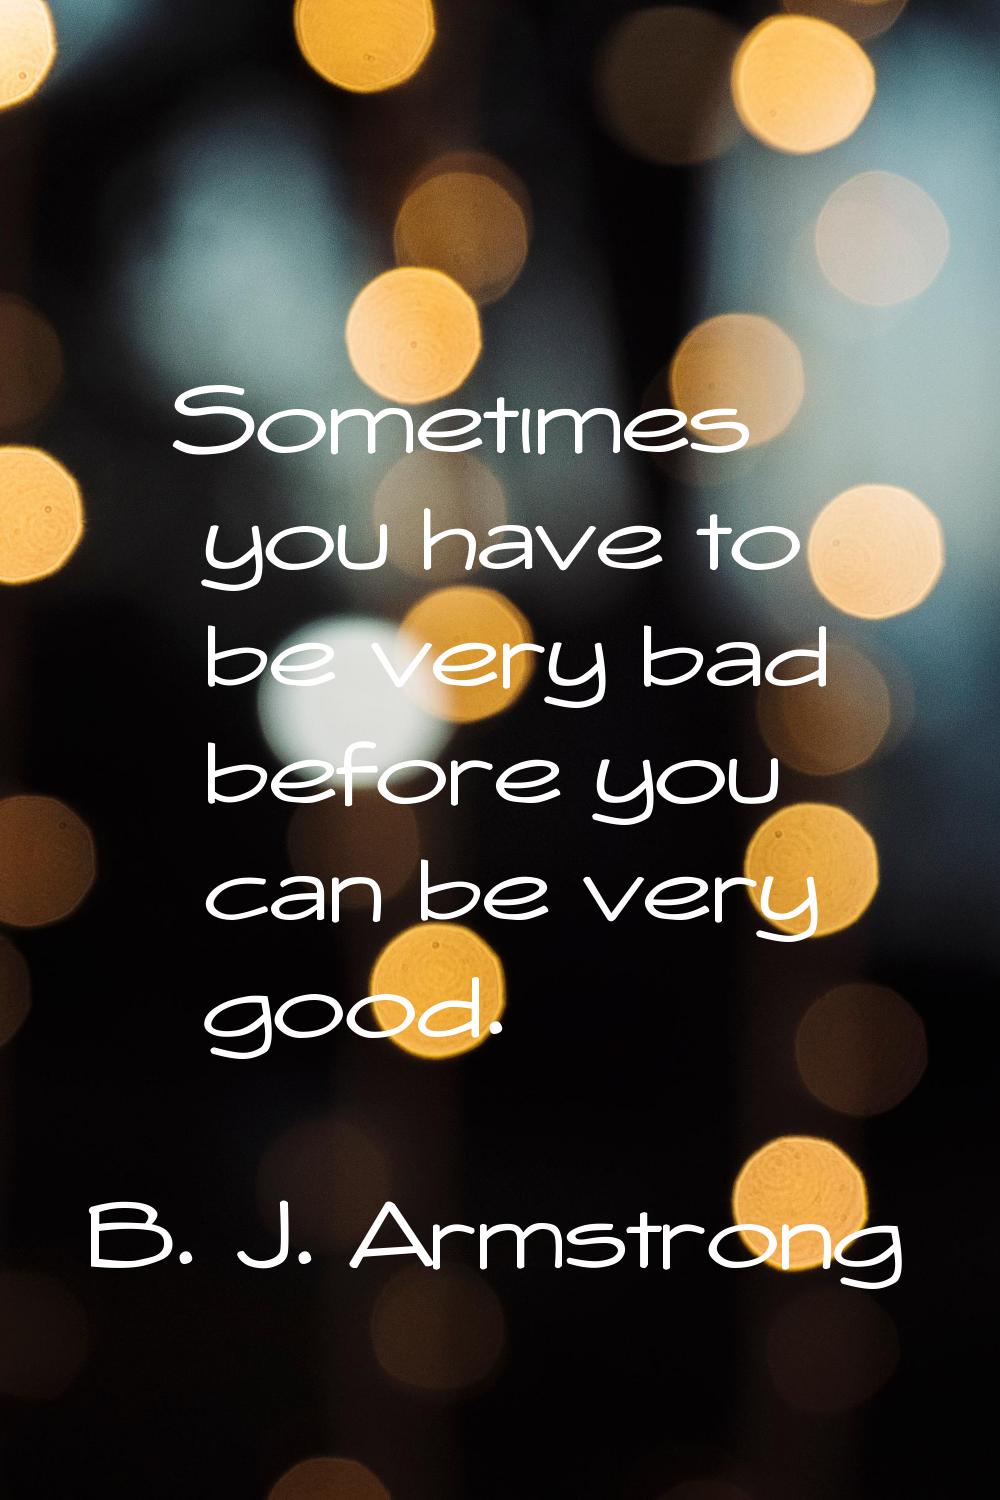 Sometimes you have to be very bad before you can be very good.